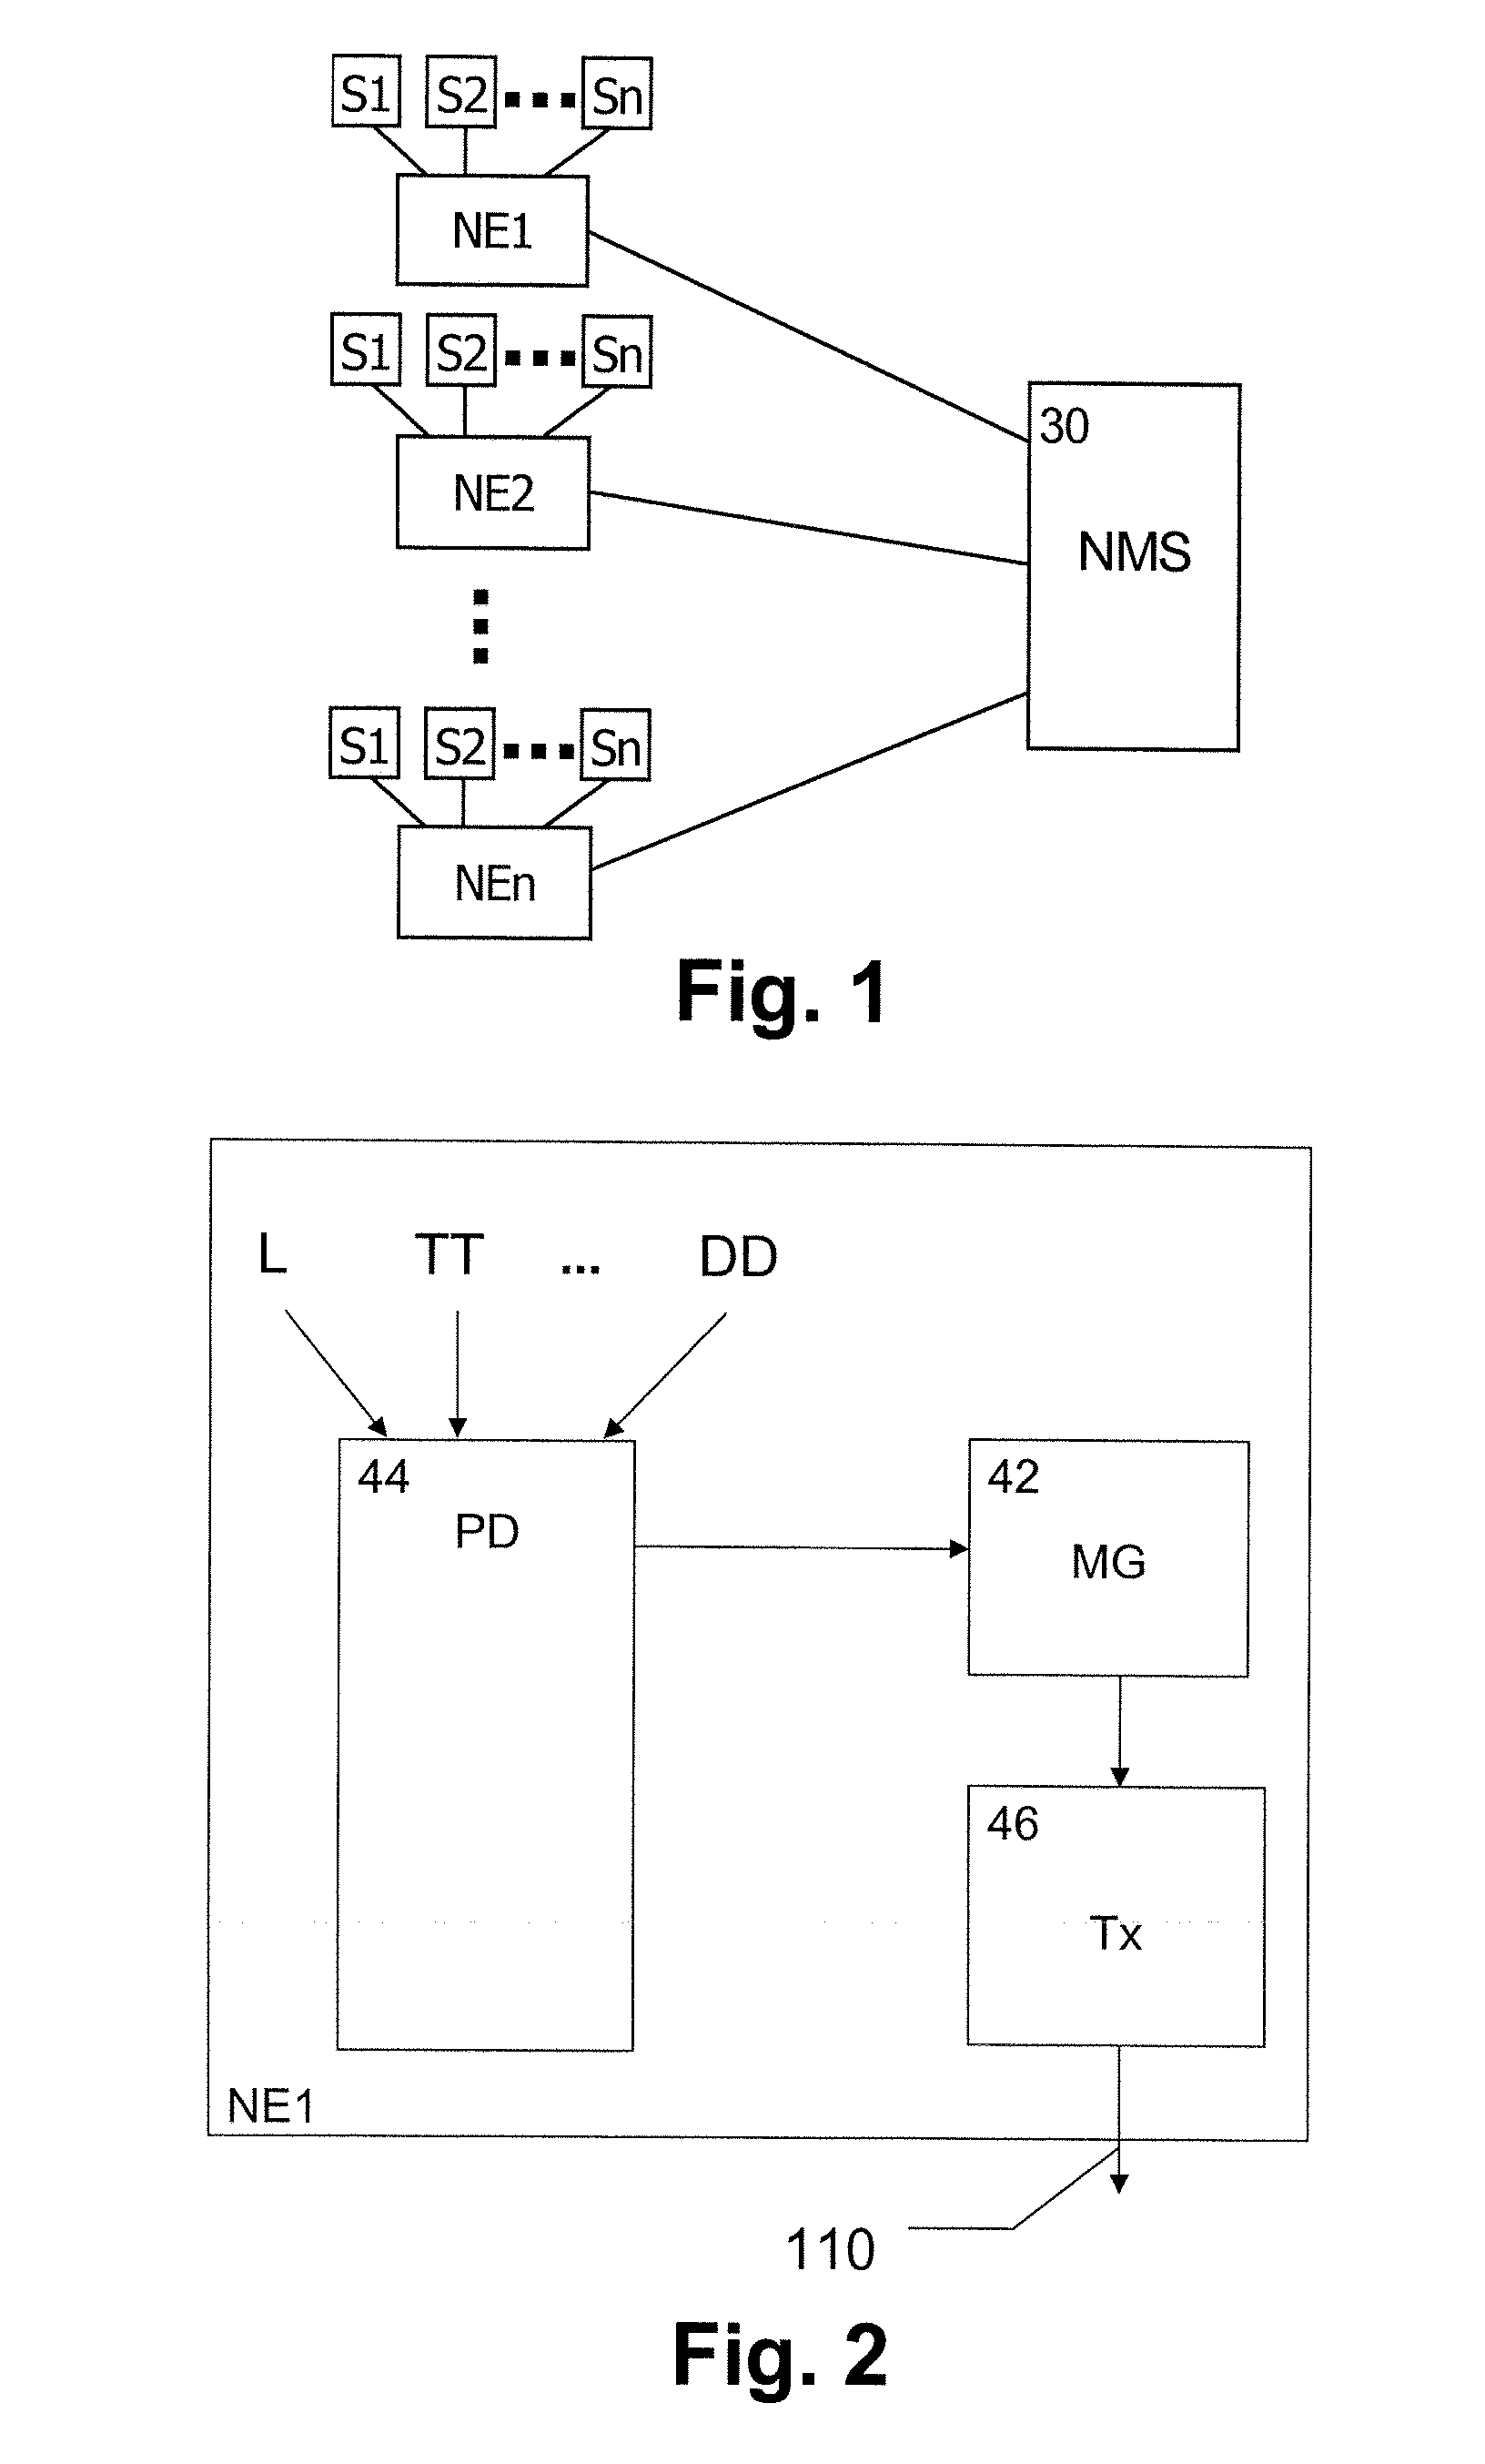 Method and System for Providing Prioritized Failure Announcements